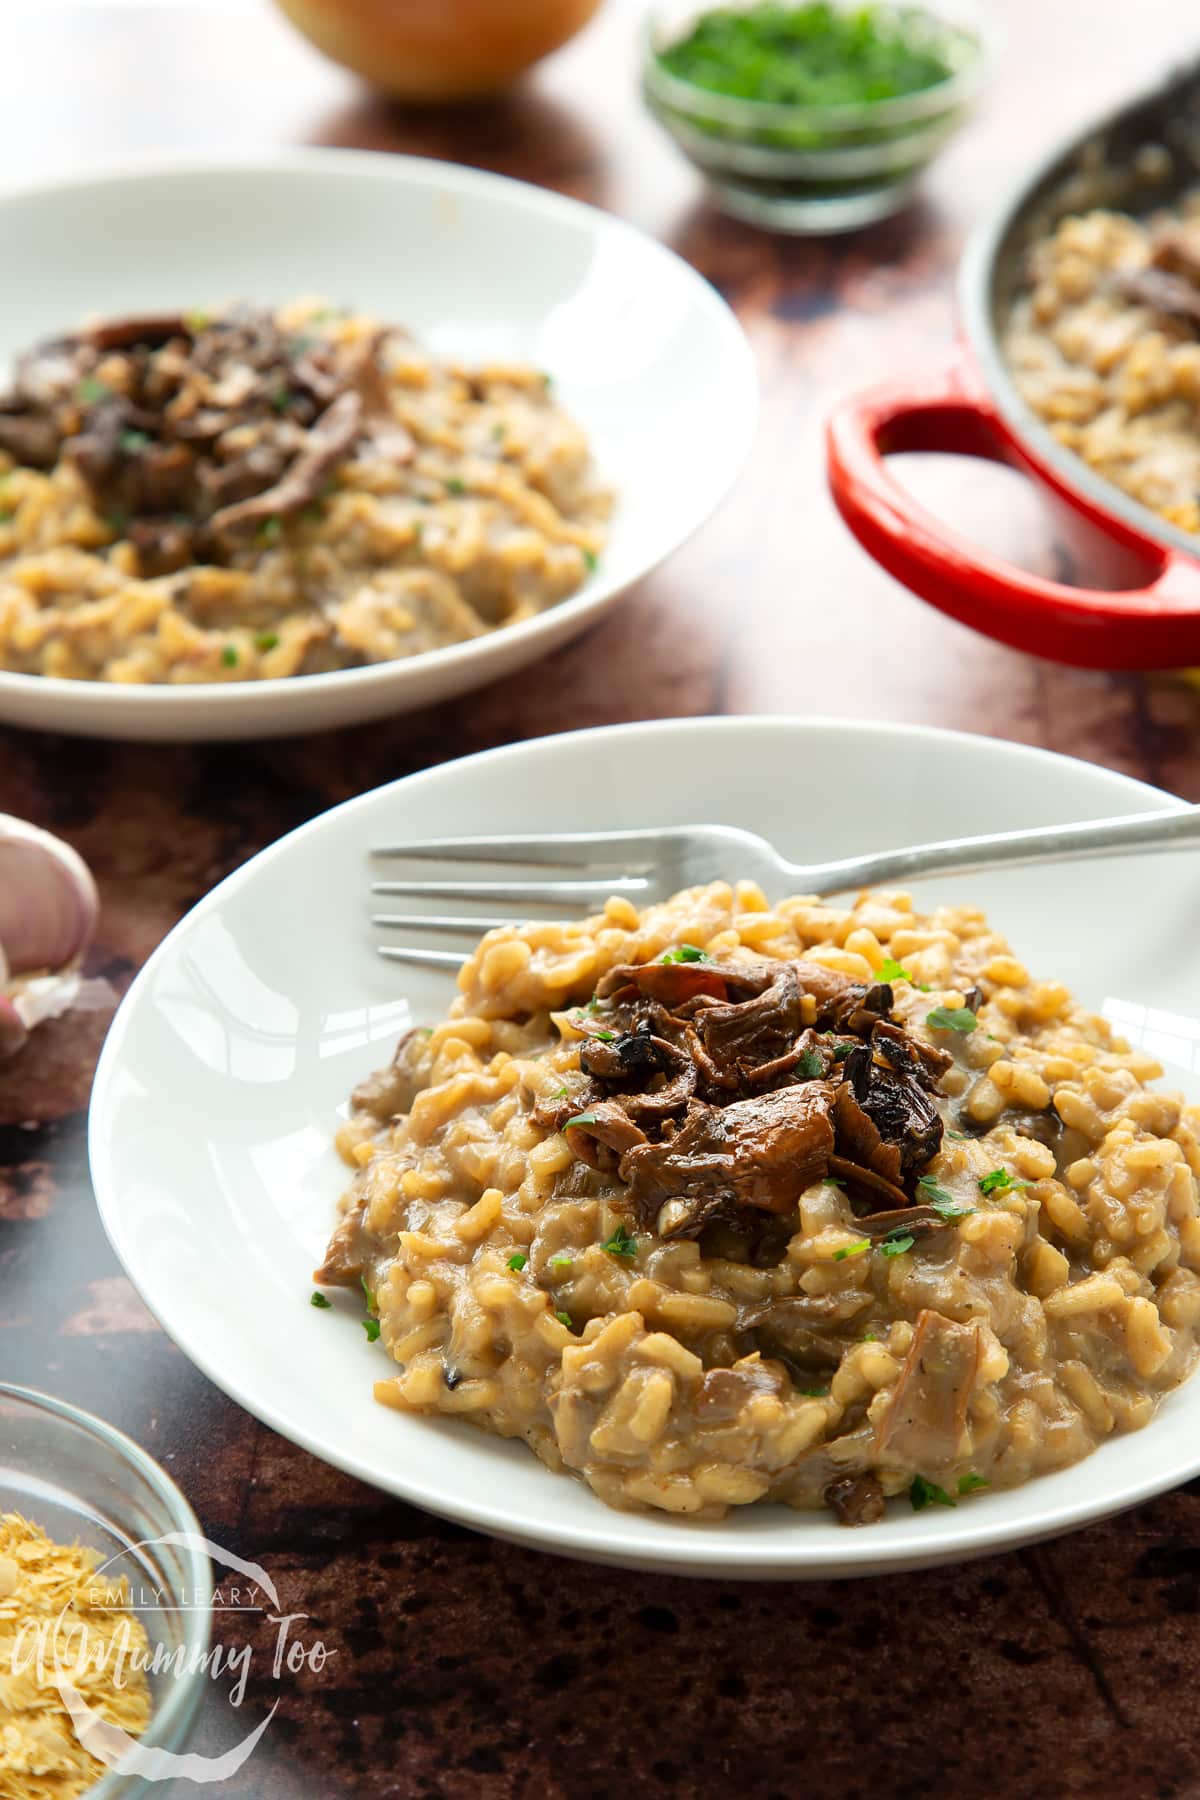 Vegan mushroom risotto in two shallow white bowls with forks.